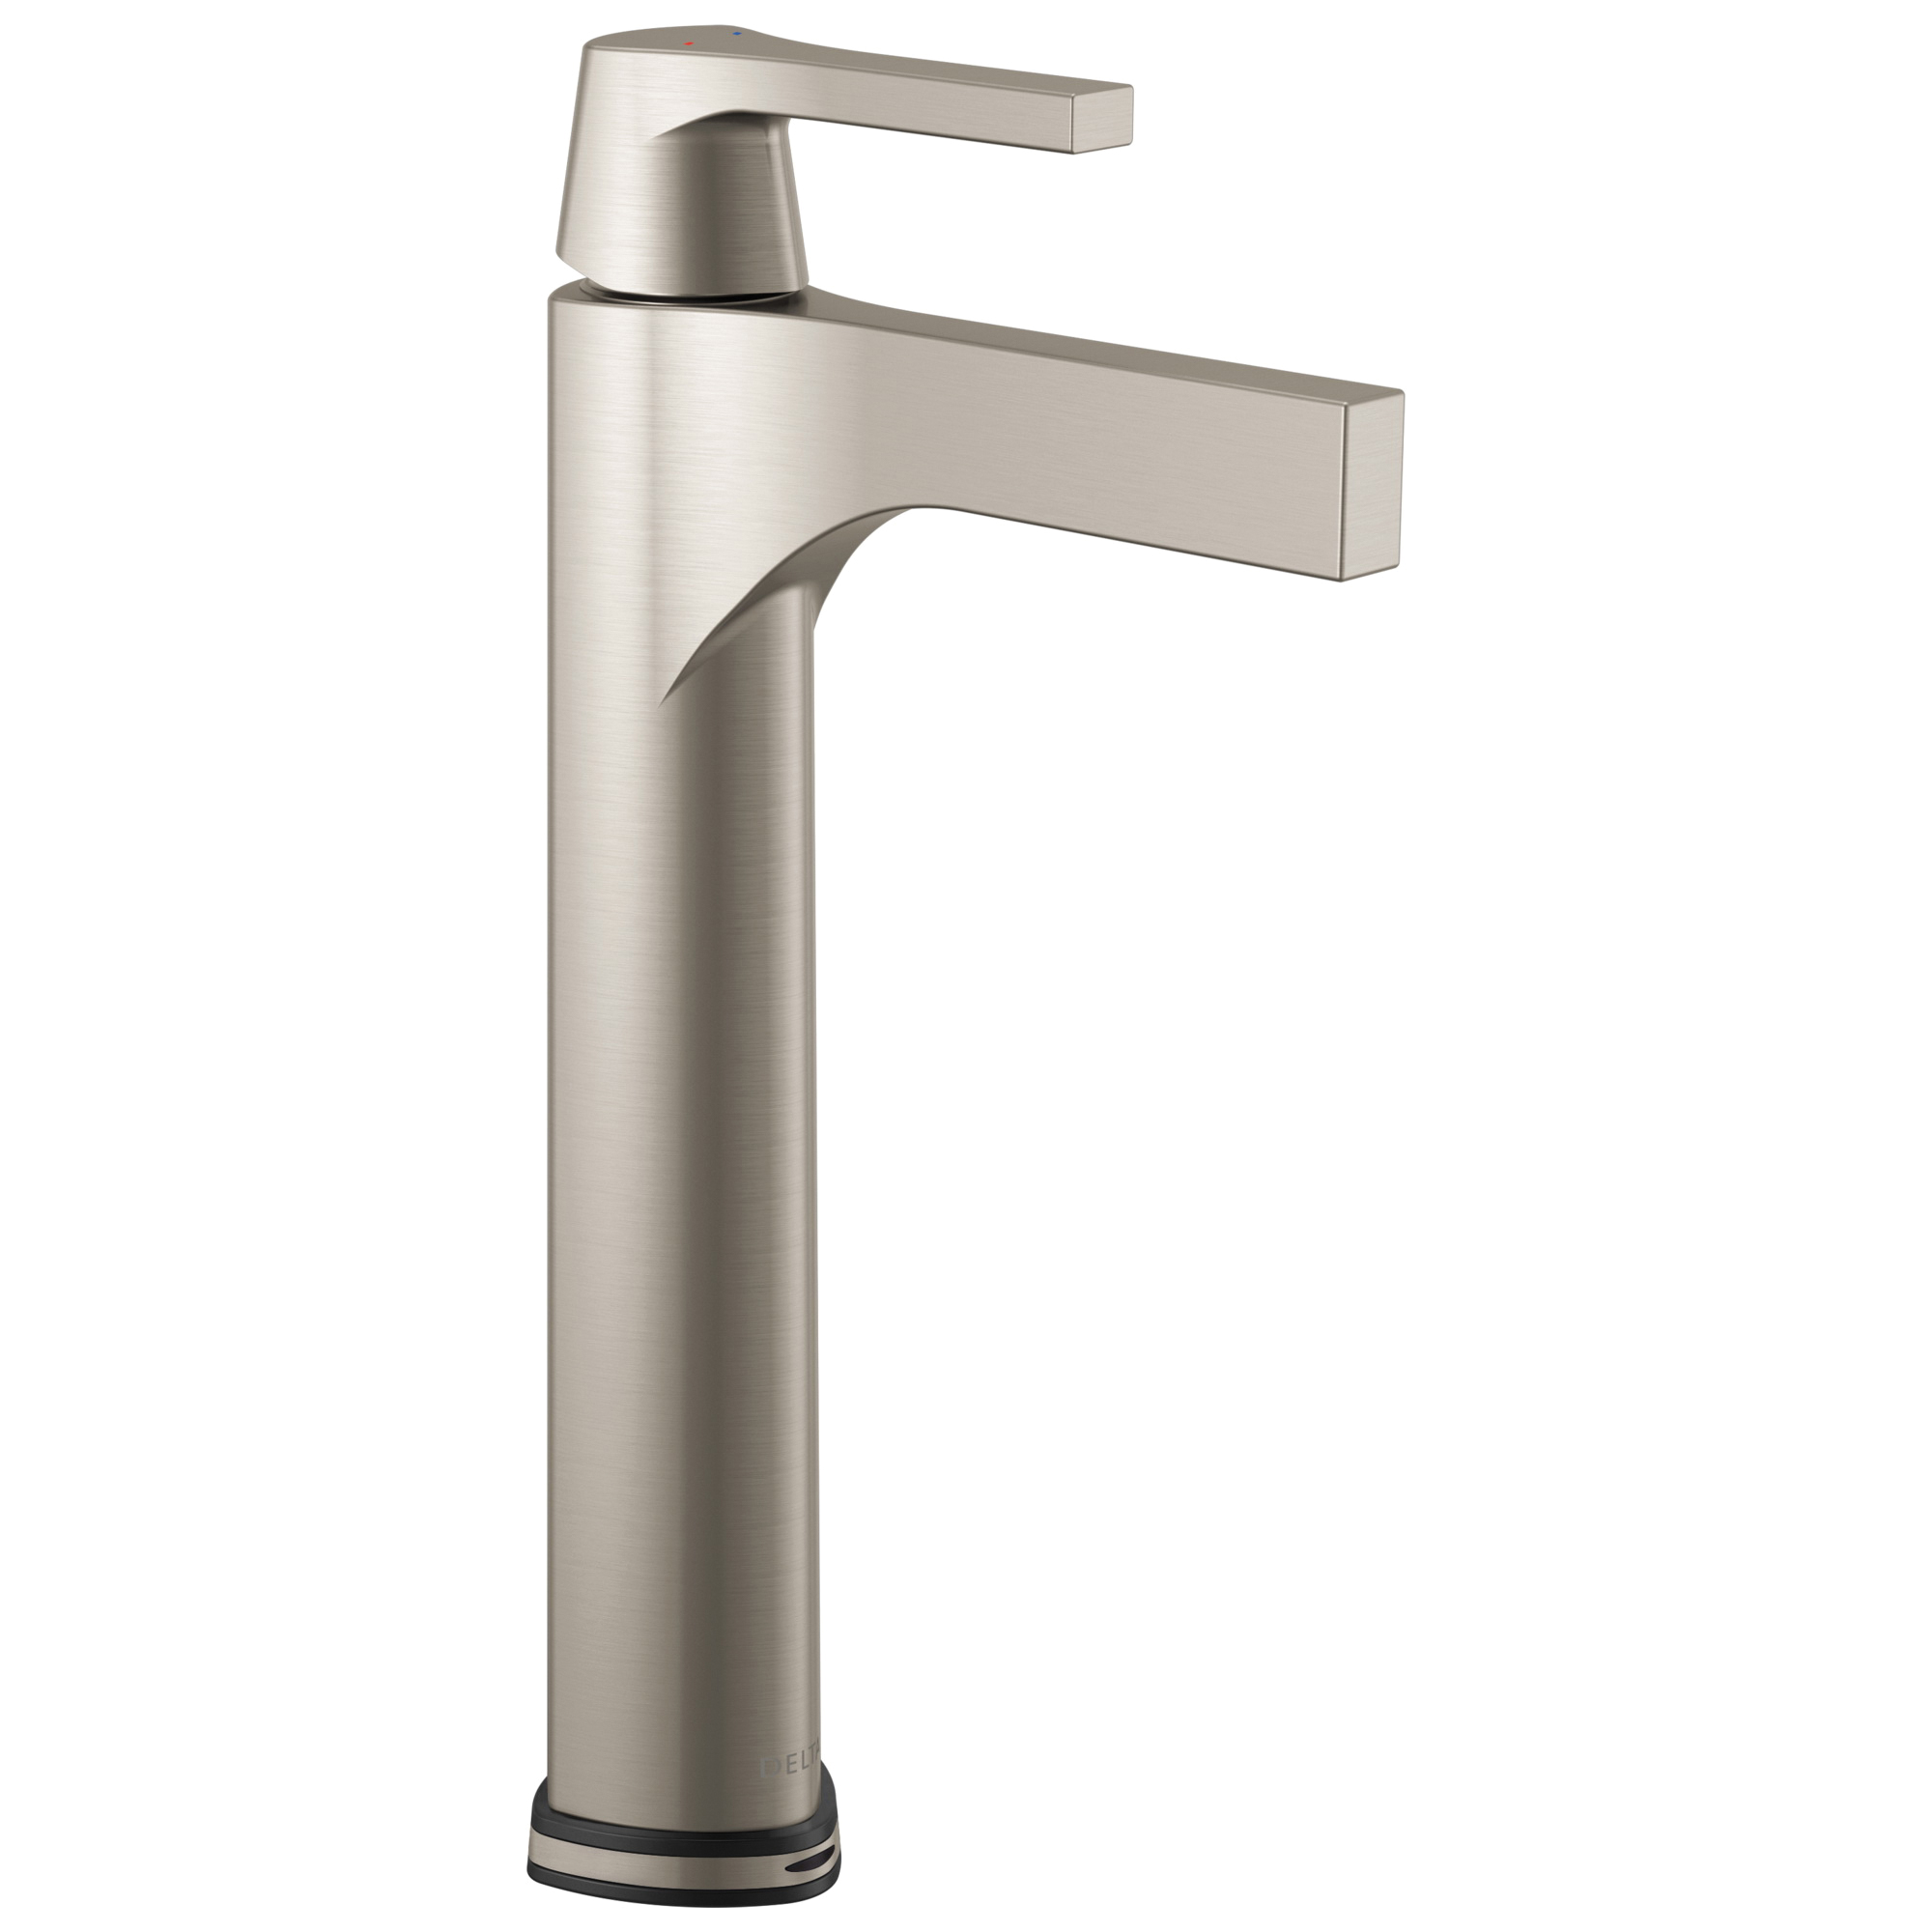 DELTA® 774T-SS-DST Zura™ Vessel Lavatory Faucet, Commercial, 5 in Spout, 10-3/16 in H Spout, Stainless Steel, 1 Handles, Domestic